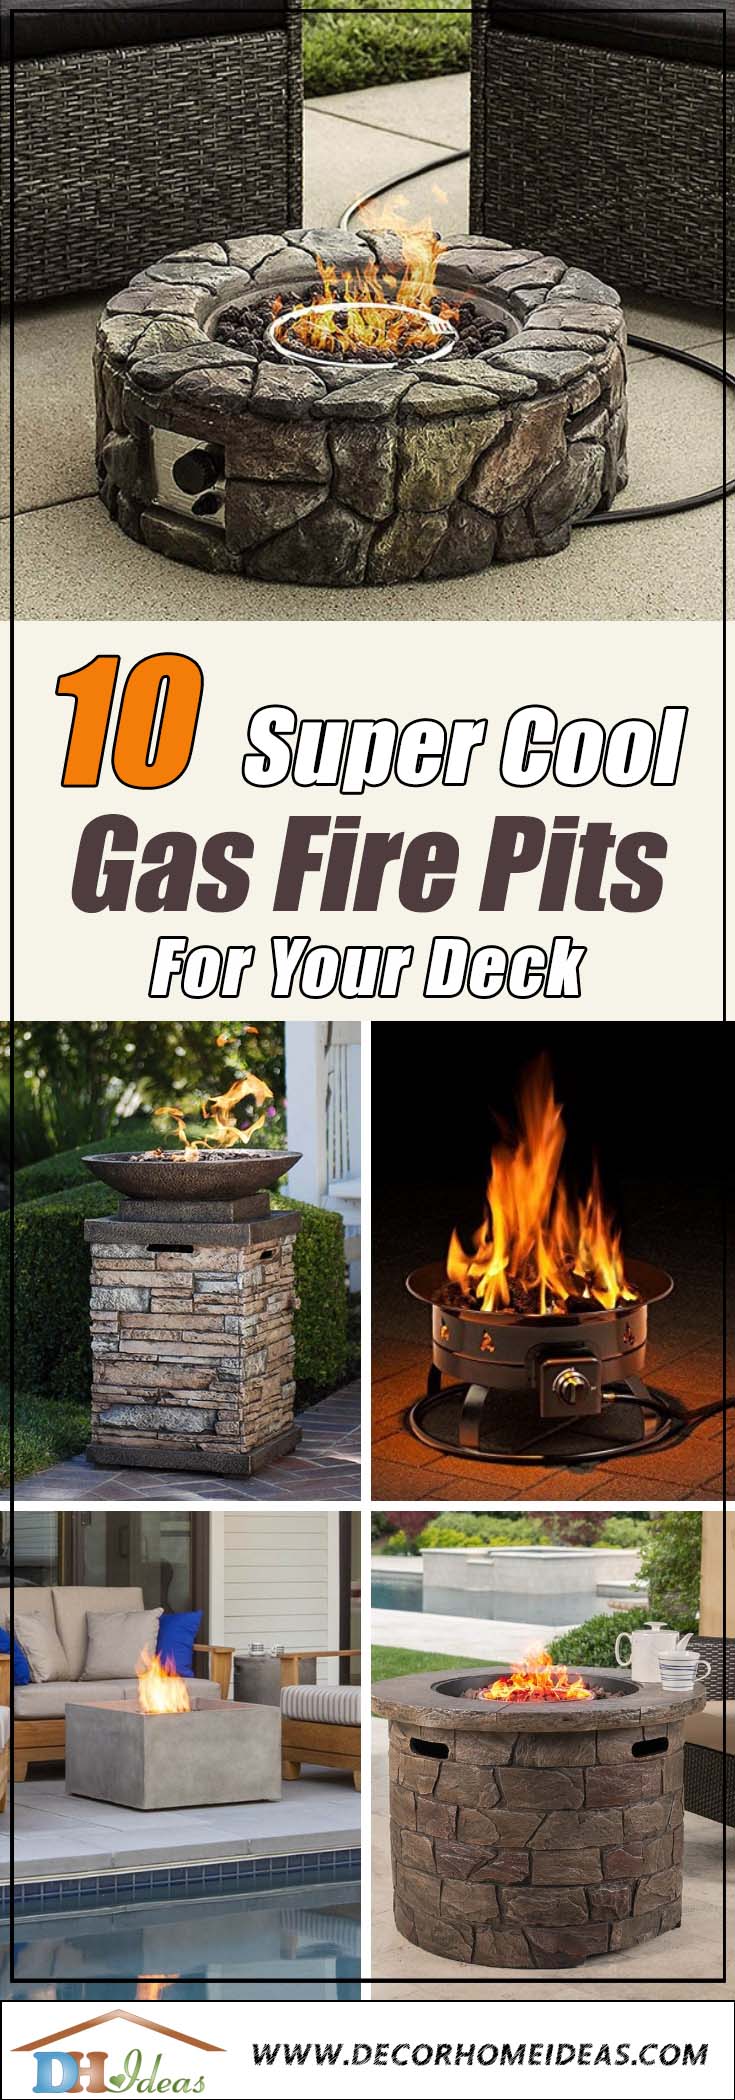 10 Best Gas Fire Pits For Deck In 2022, Best Gas Fire Pit For Wood Deck